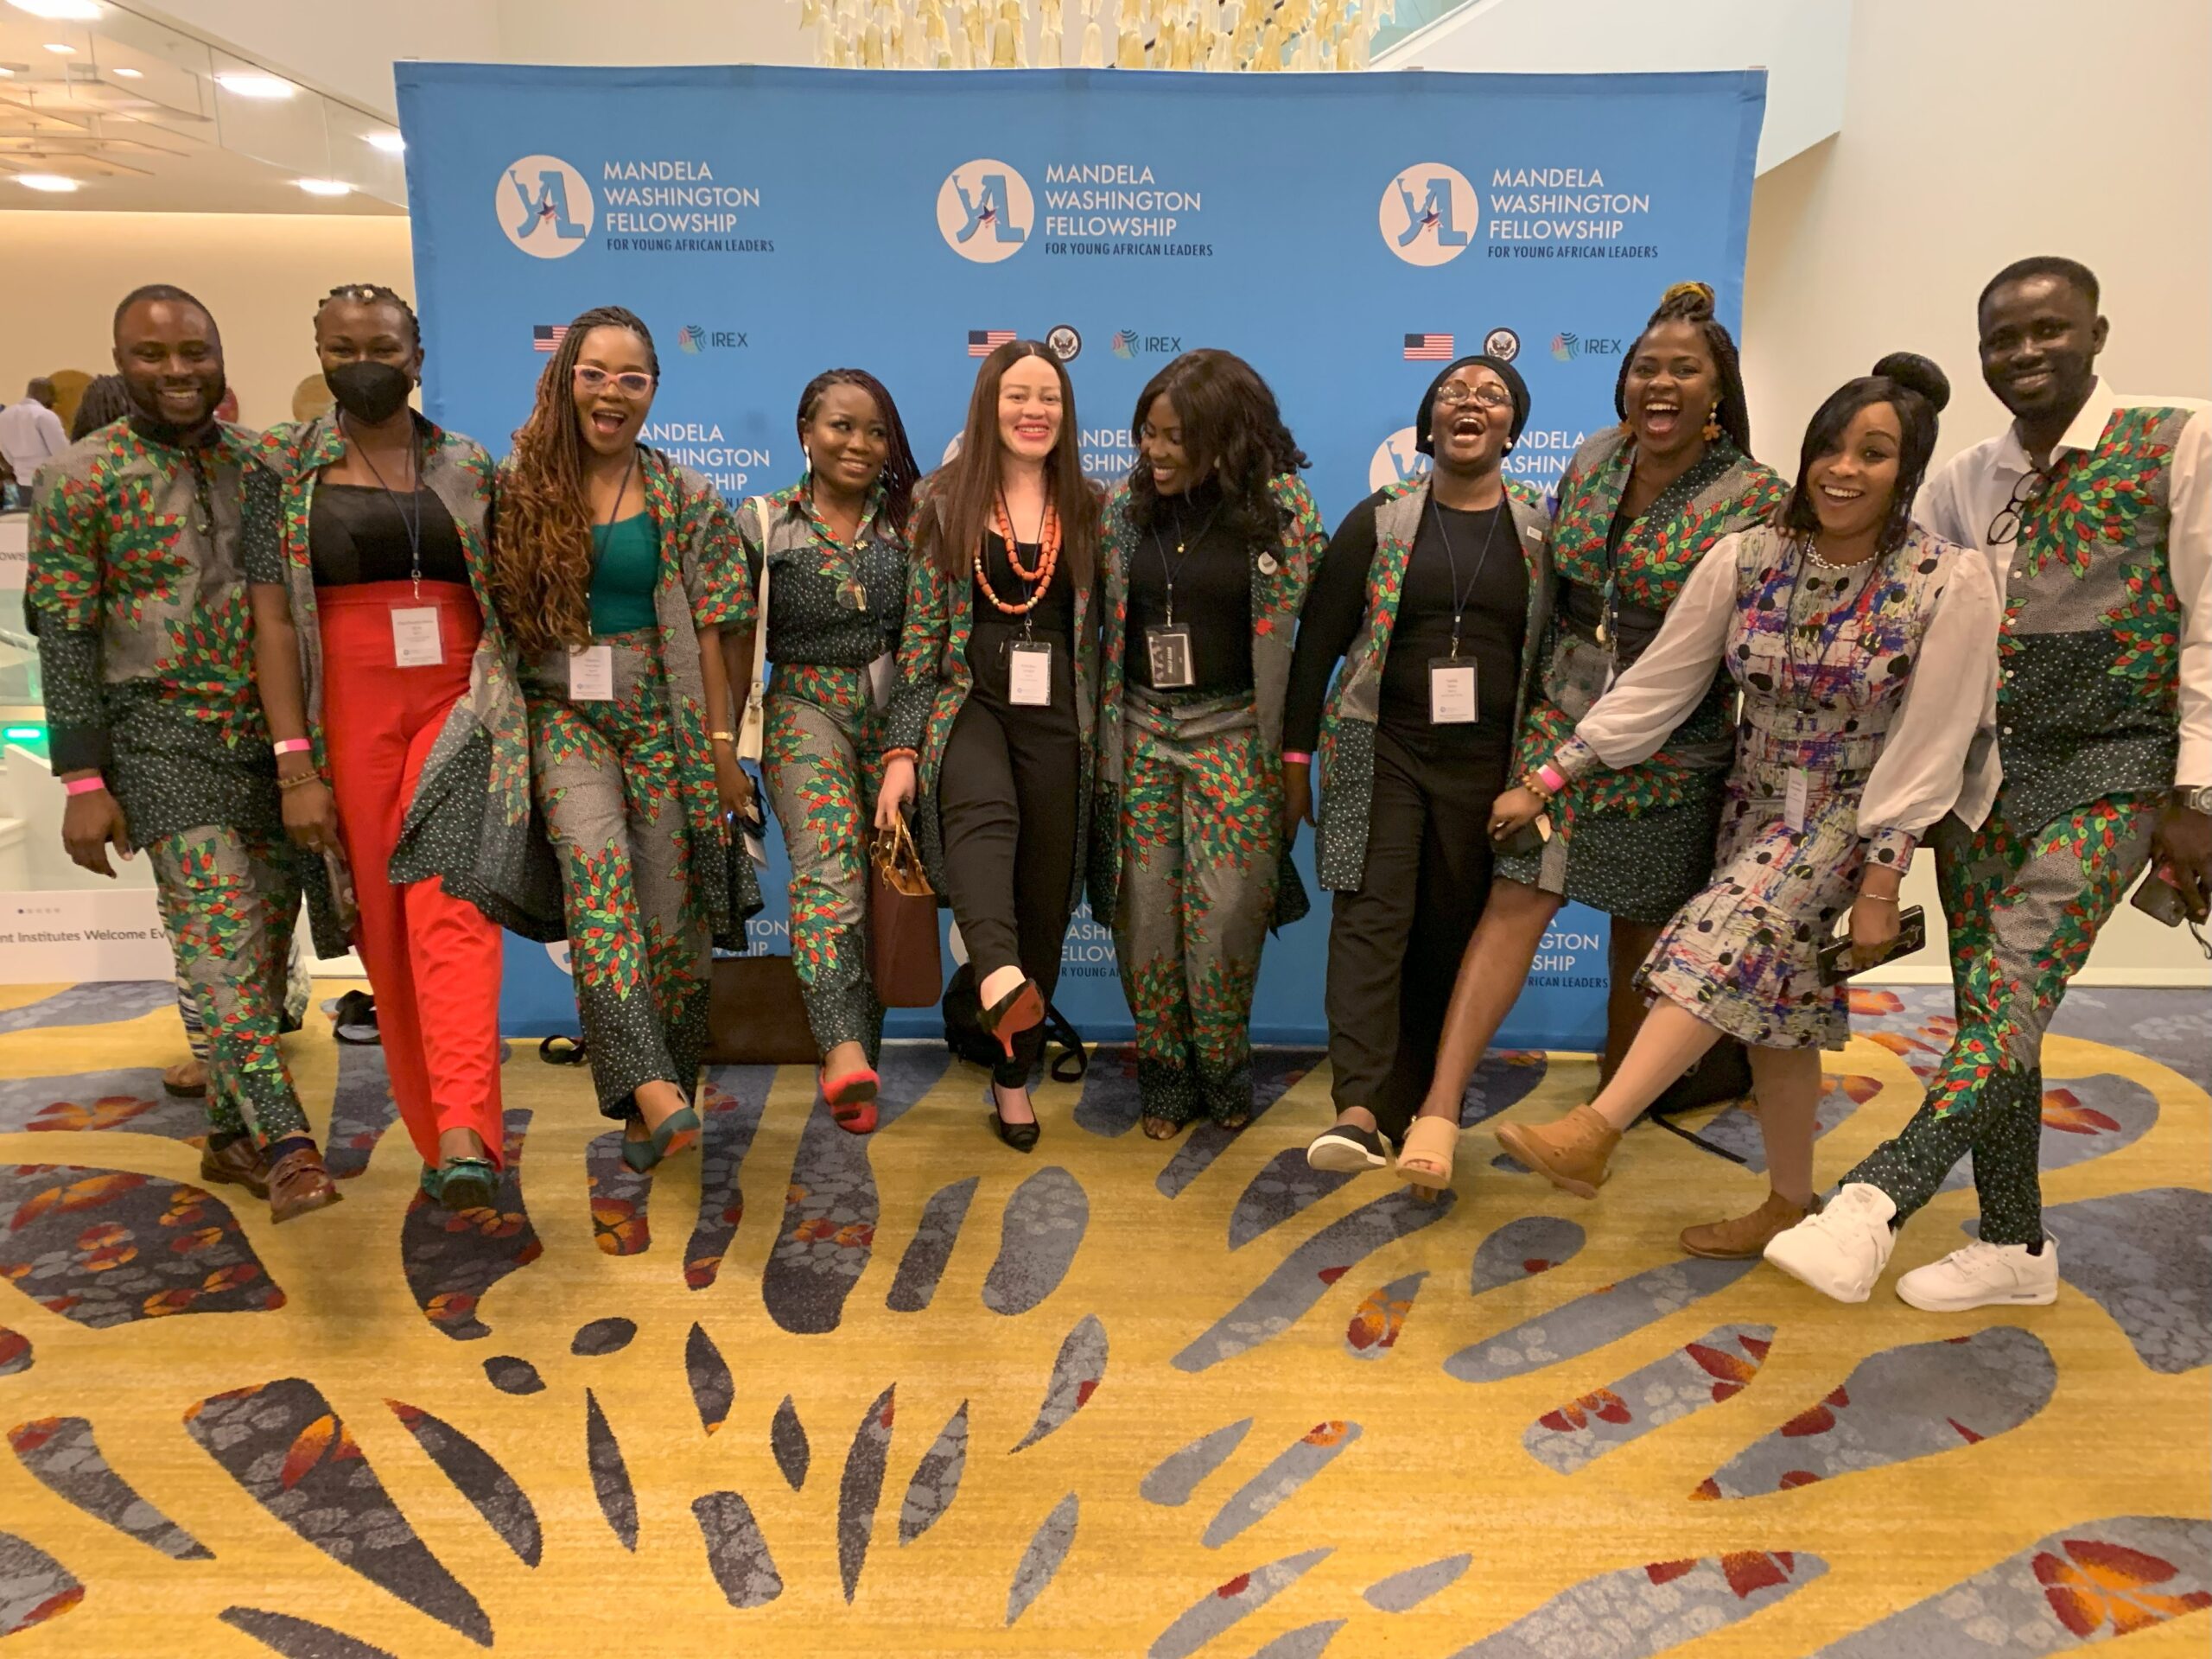 Racheal Inegbedion posing with other Nigerian Mandela Washington Fellows in front of a blue banner in Washington DC.